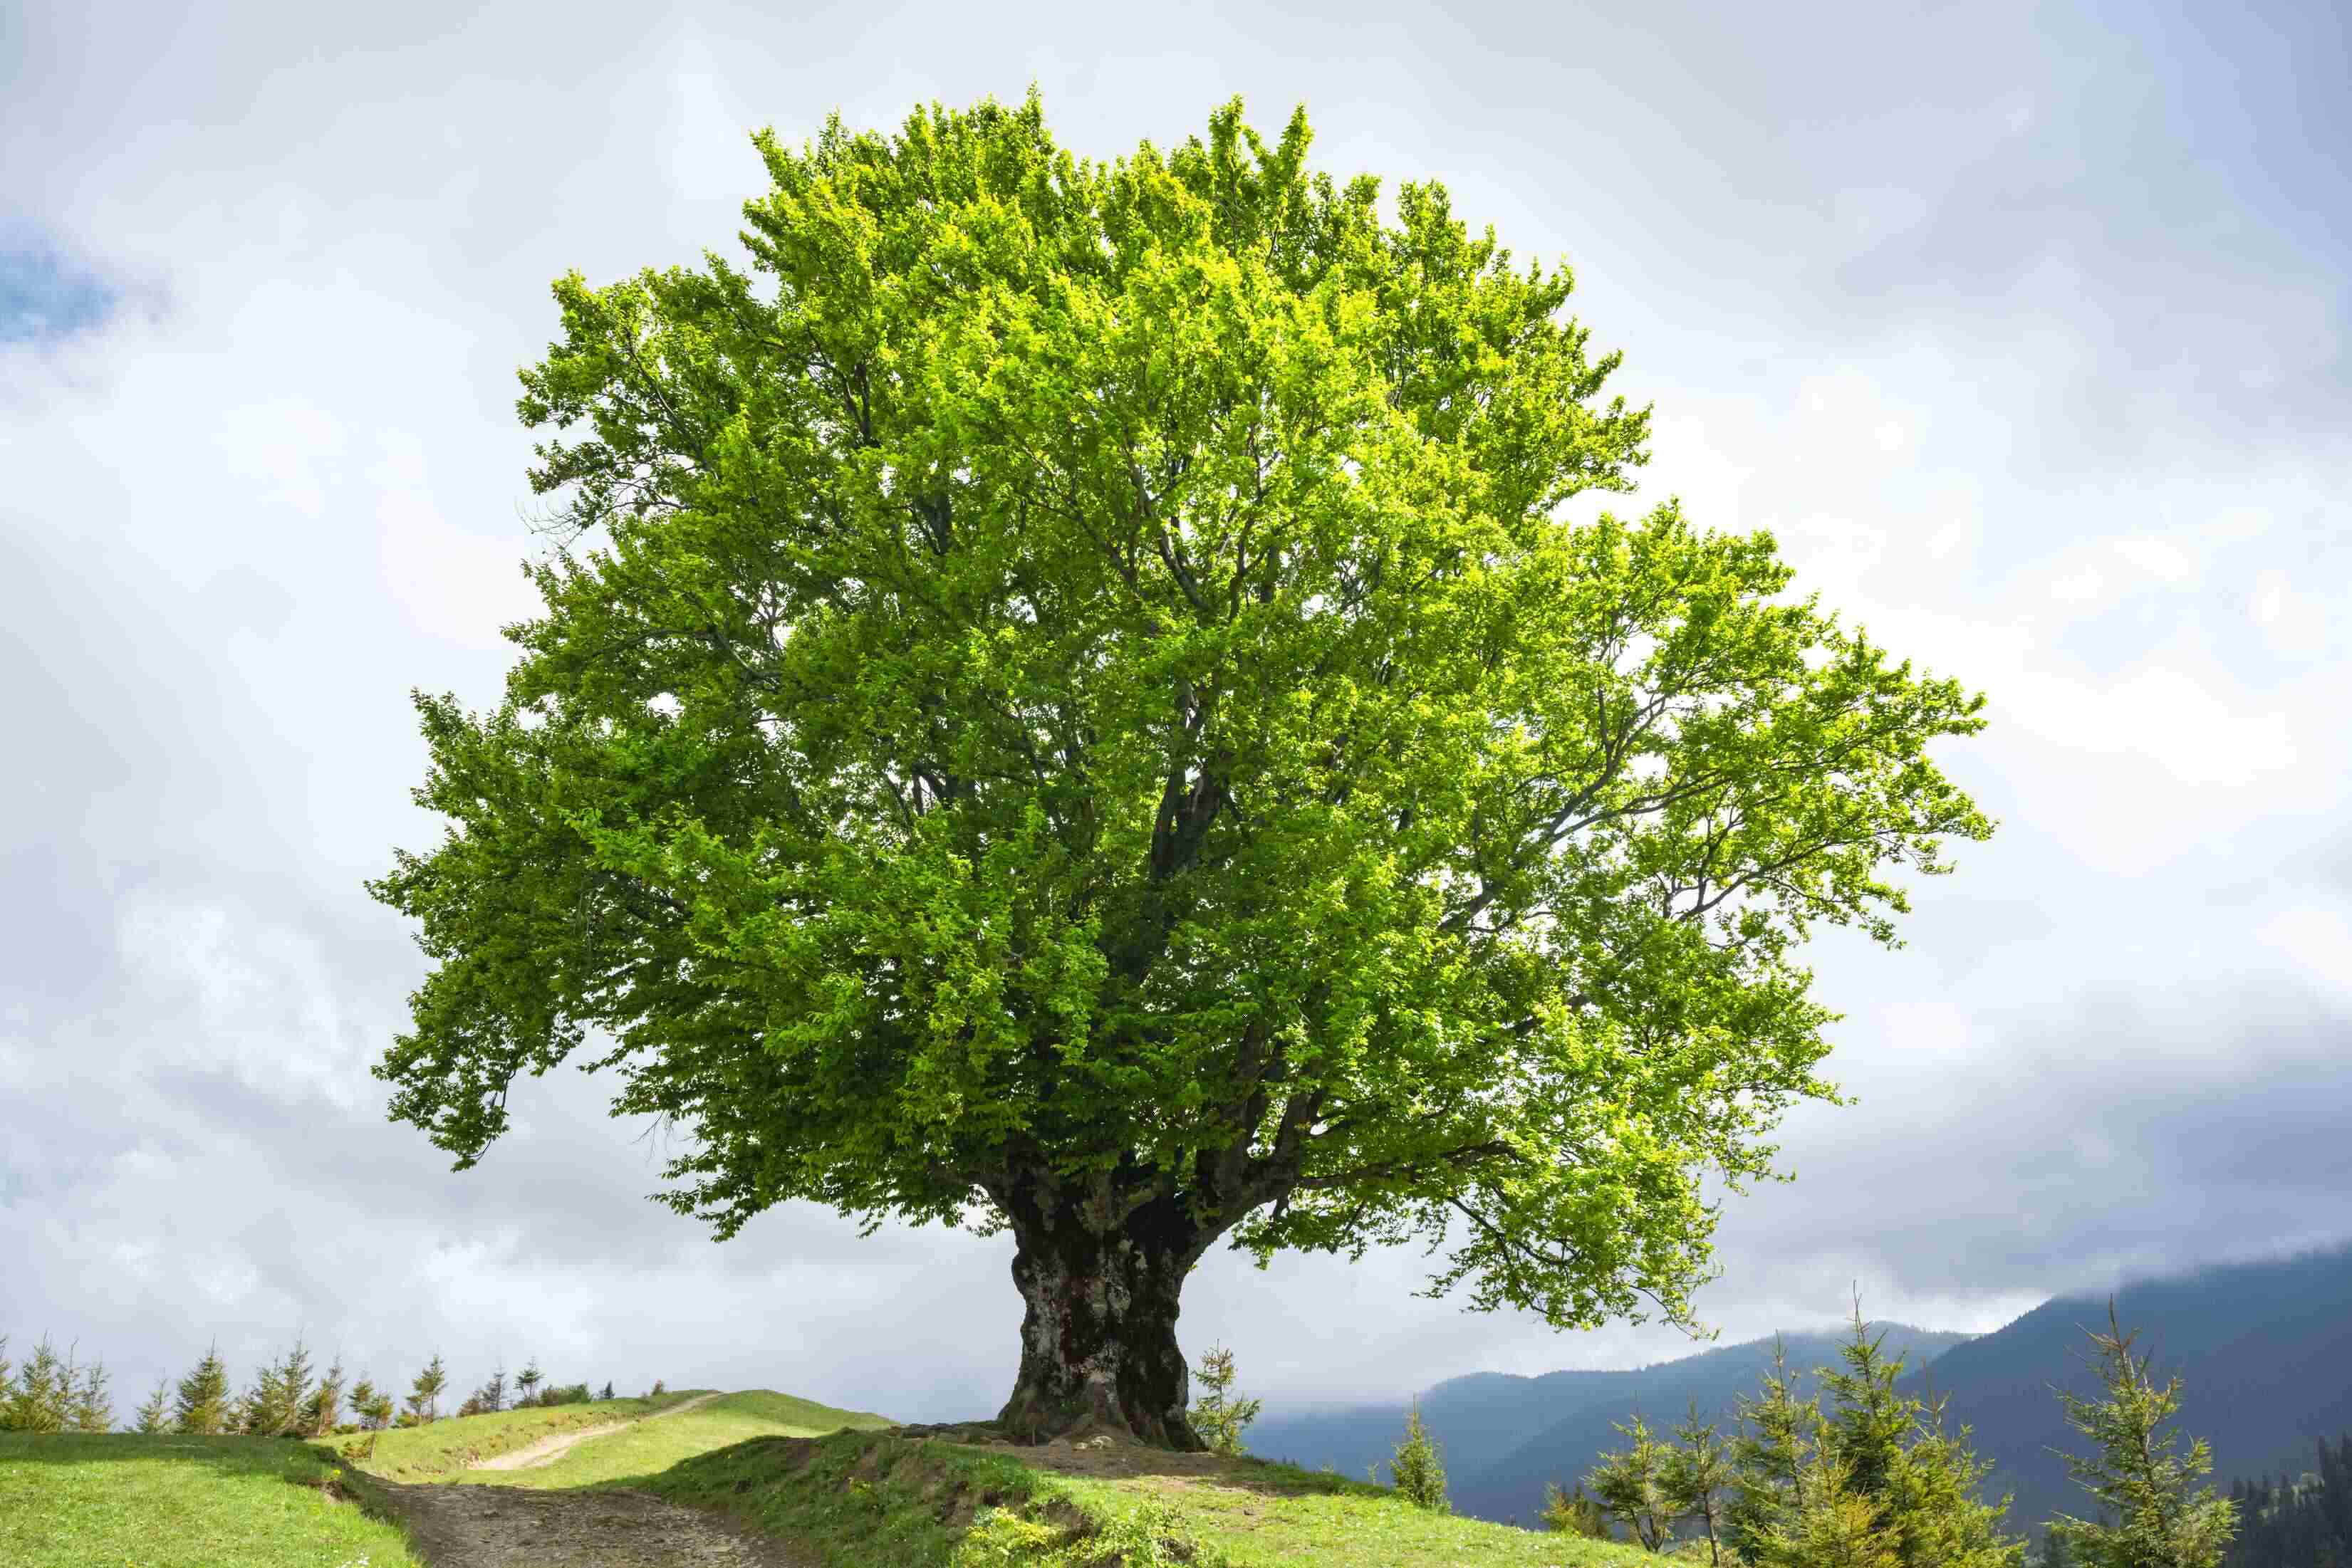 Large old beech tree with lush green leaves